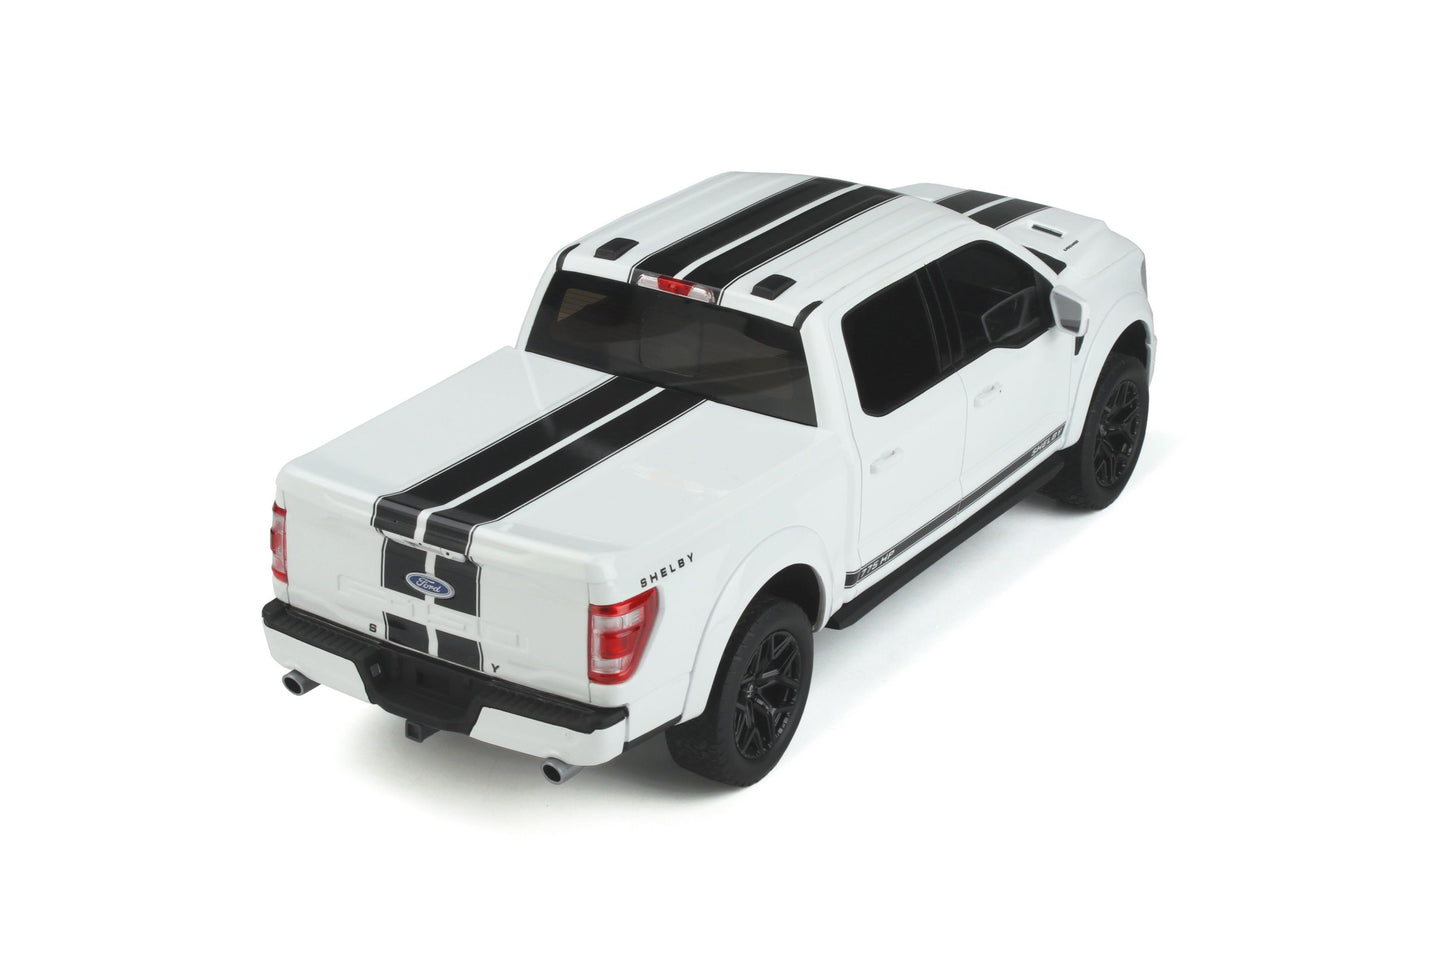 GT Spirit - Shelby Ford F150 "Off-Road" (Star White) 1:18 Scale Model Car